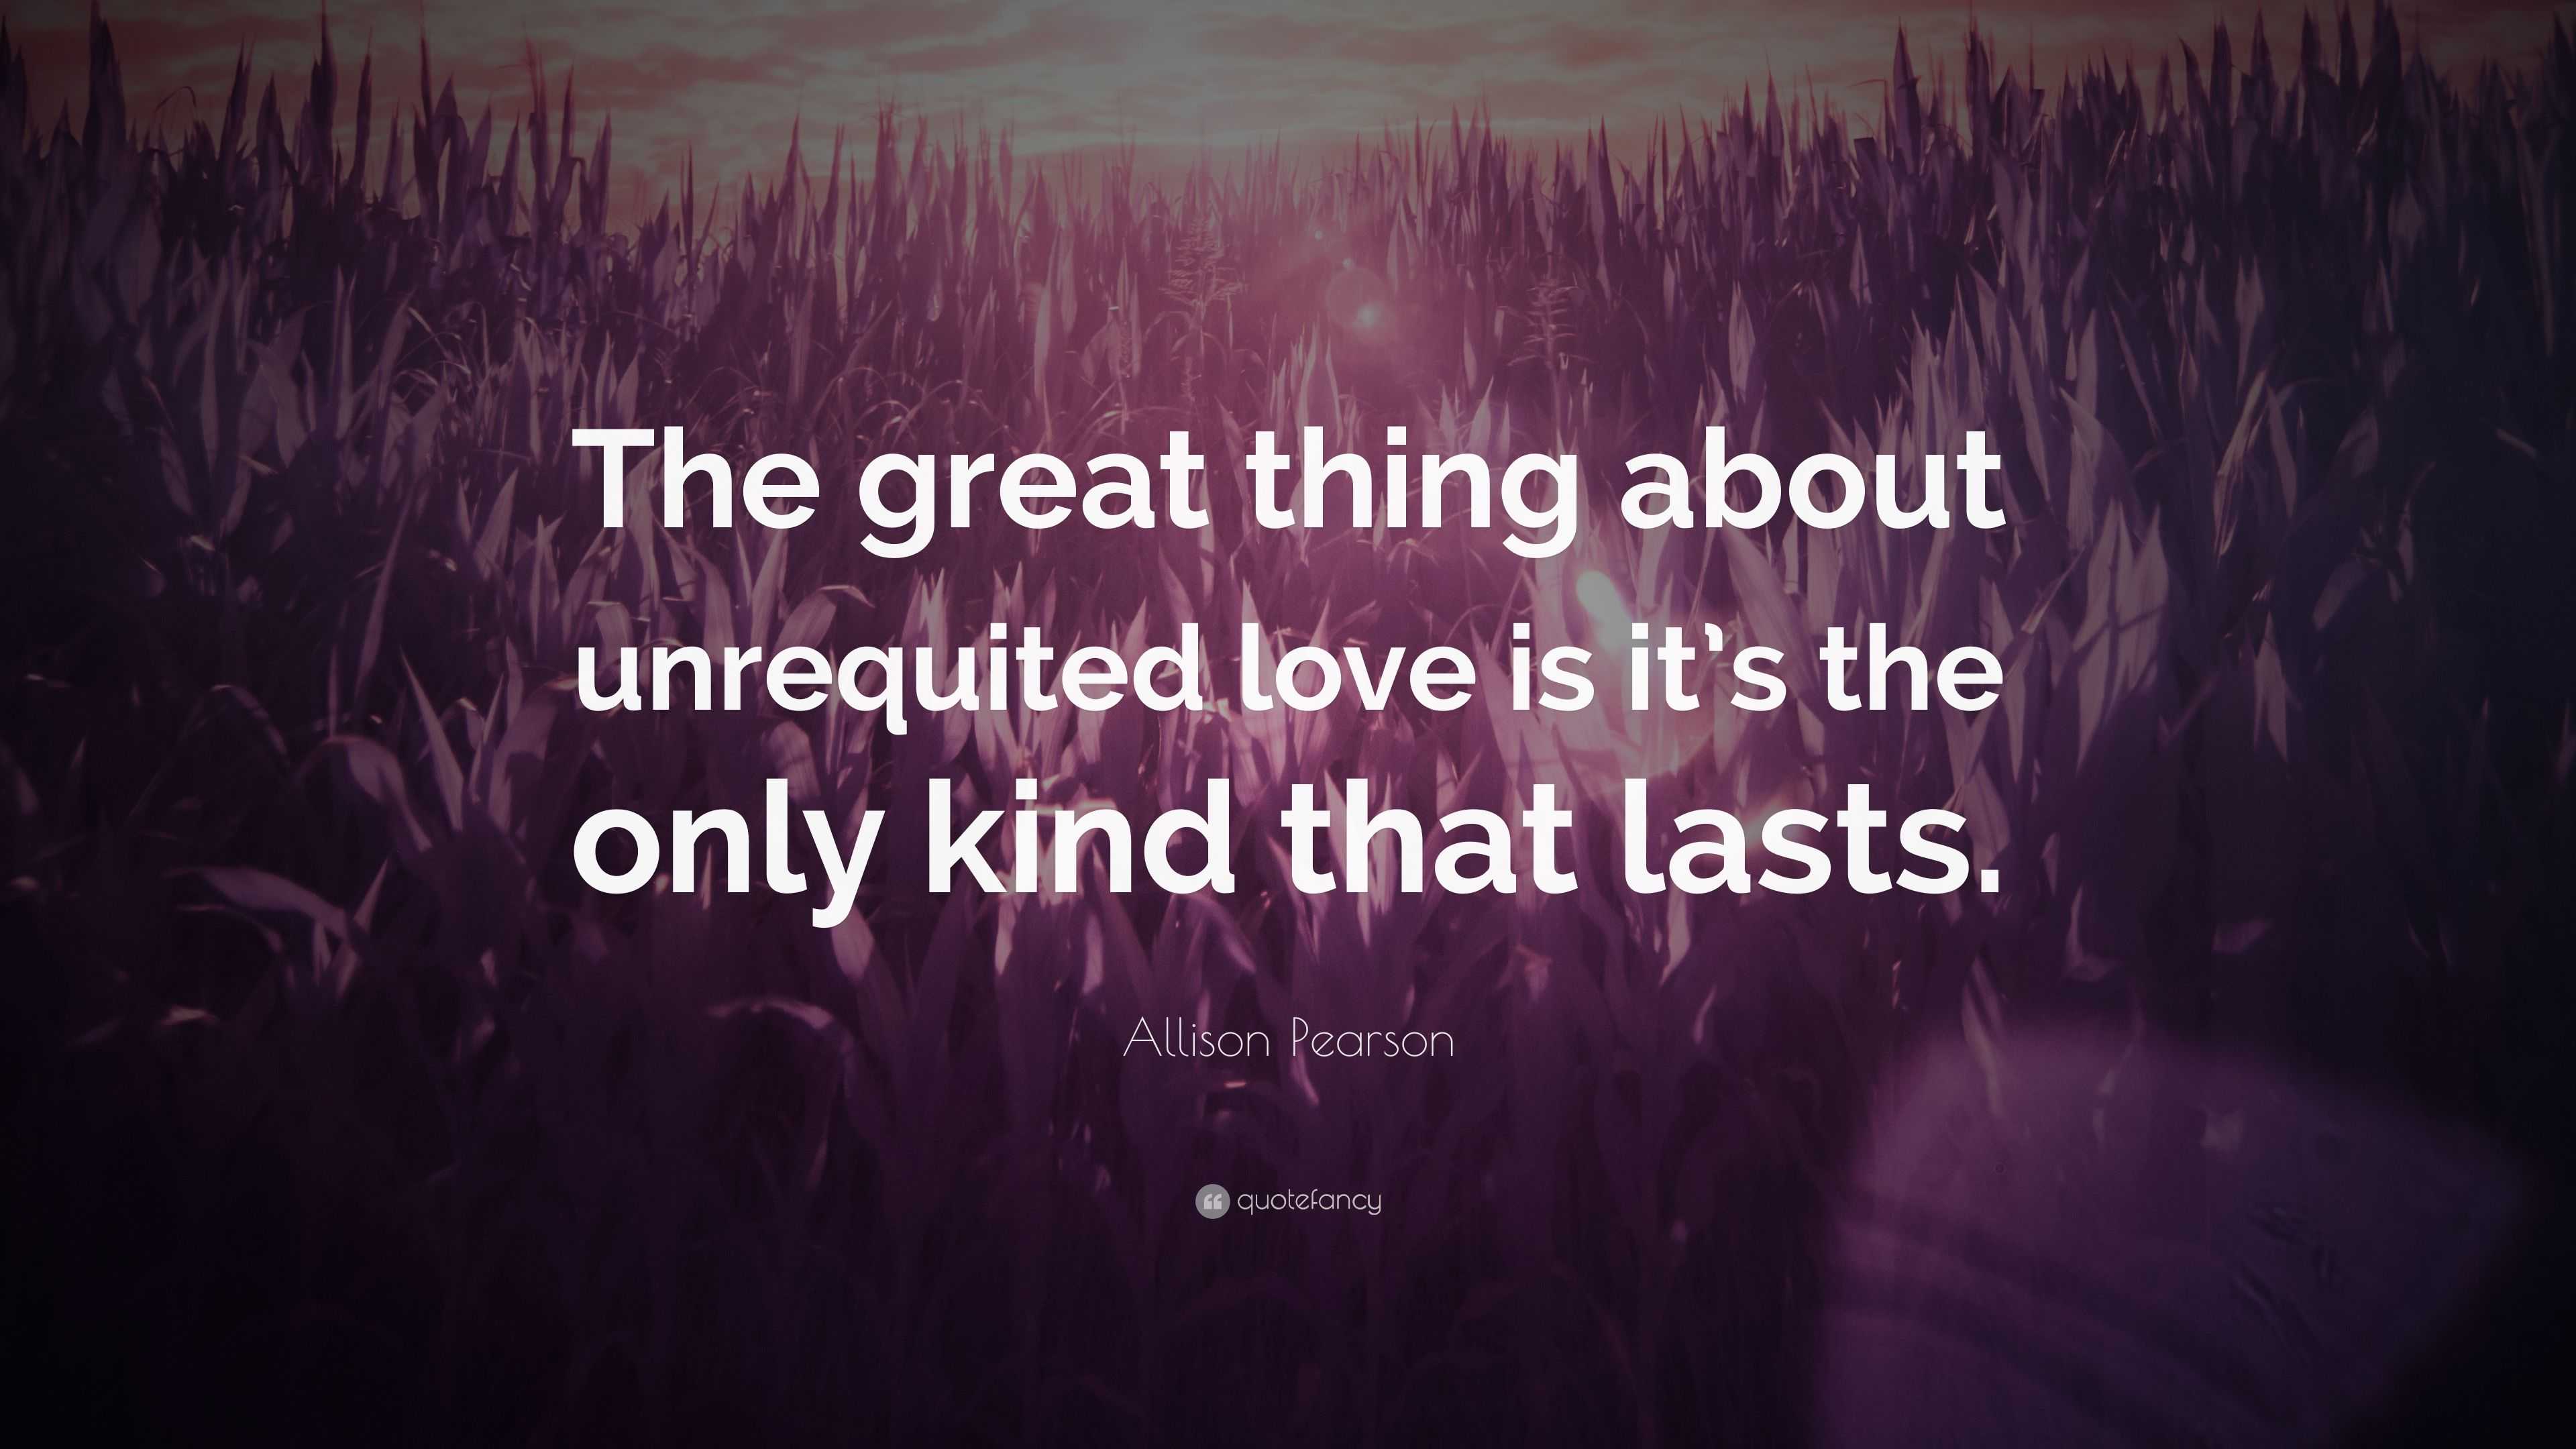 Allison Pearson Quote: “The great thing about unrequited love is it’s ...